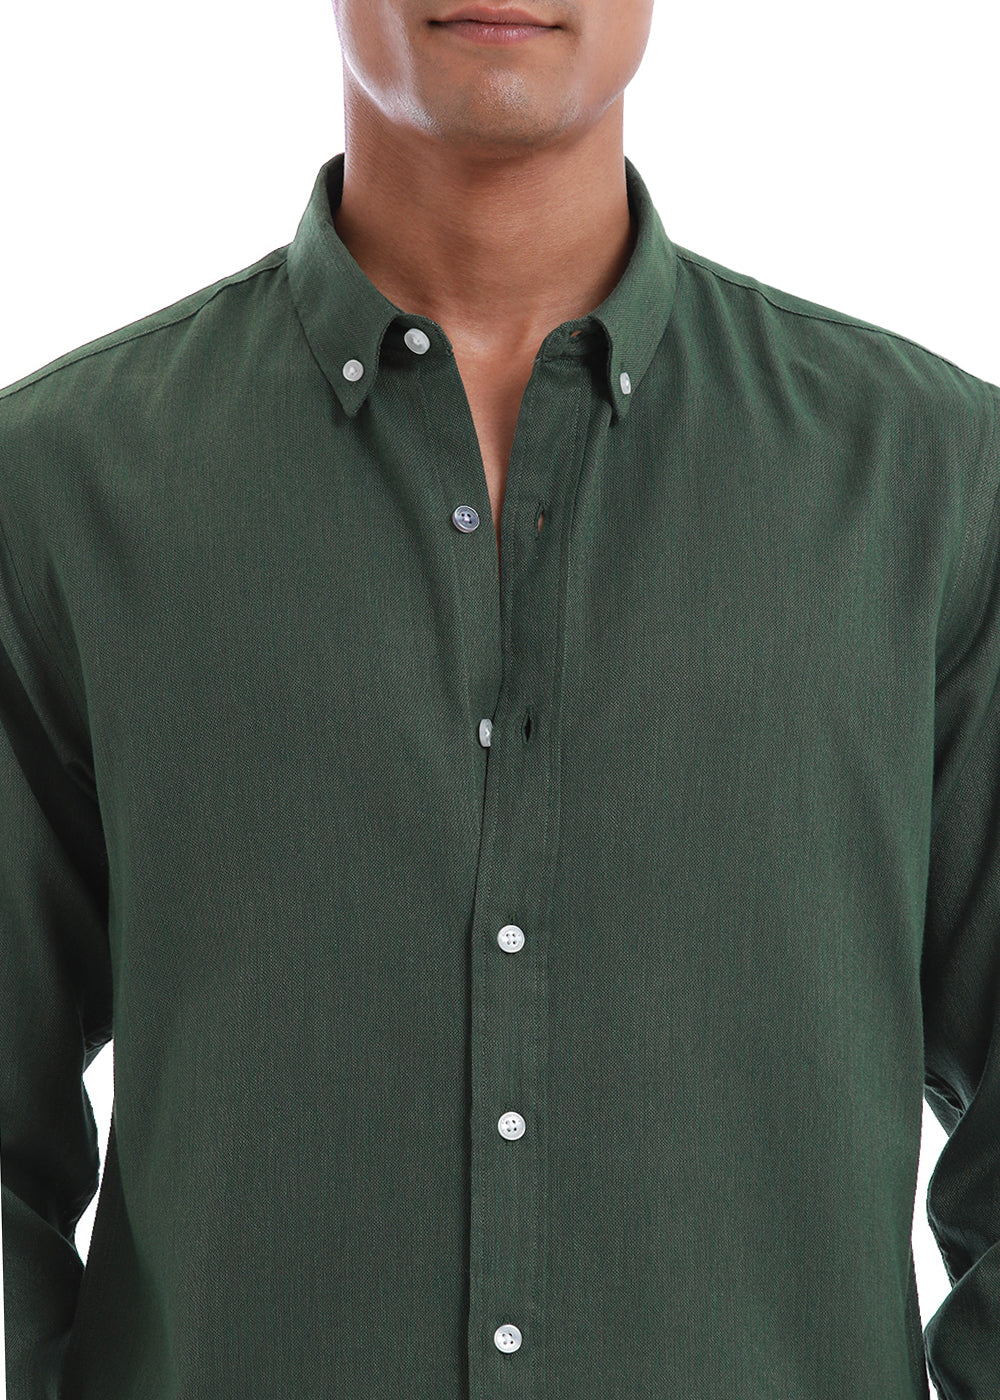 Cilantro Green Blended Linen shirt front view